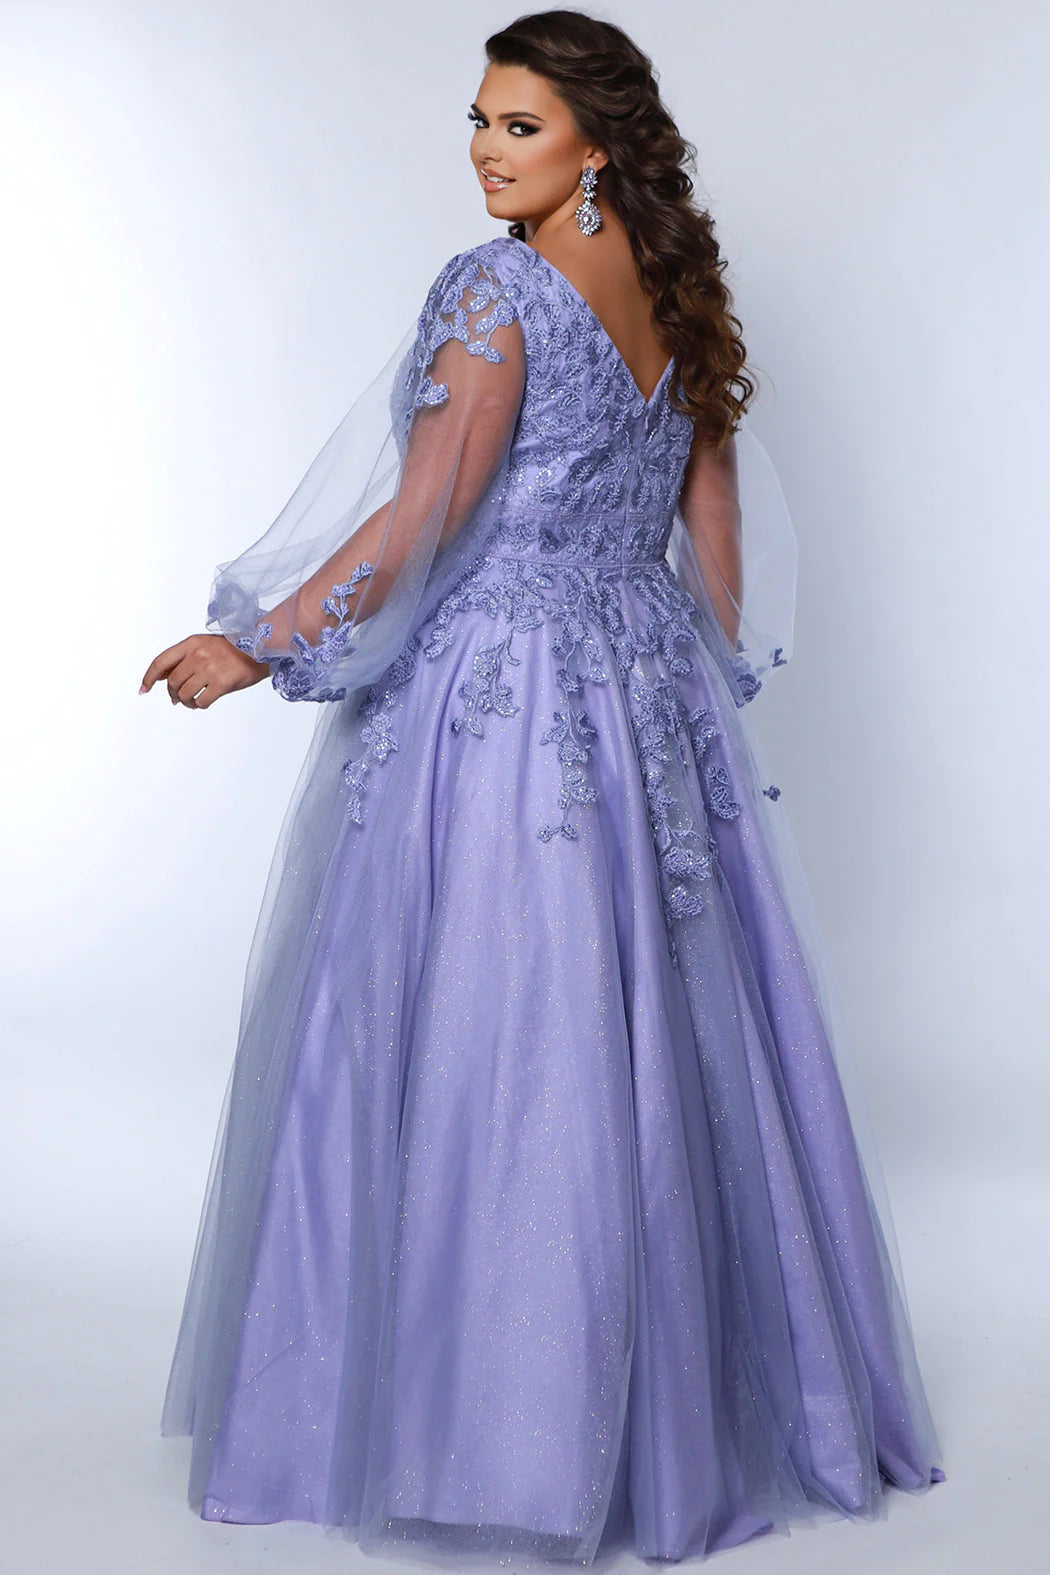 All About Prom Dresses: Fabrics, Dress Types & Style by Peaches Boutique -  Issuu